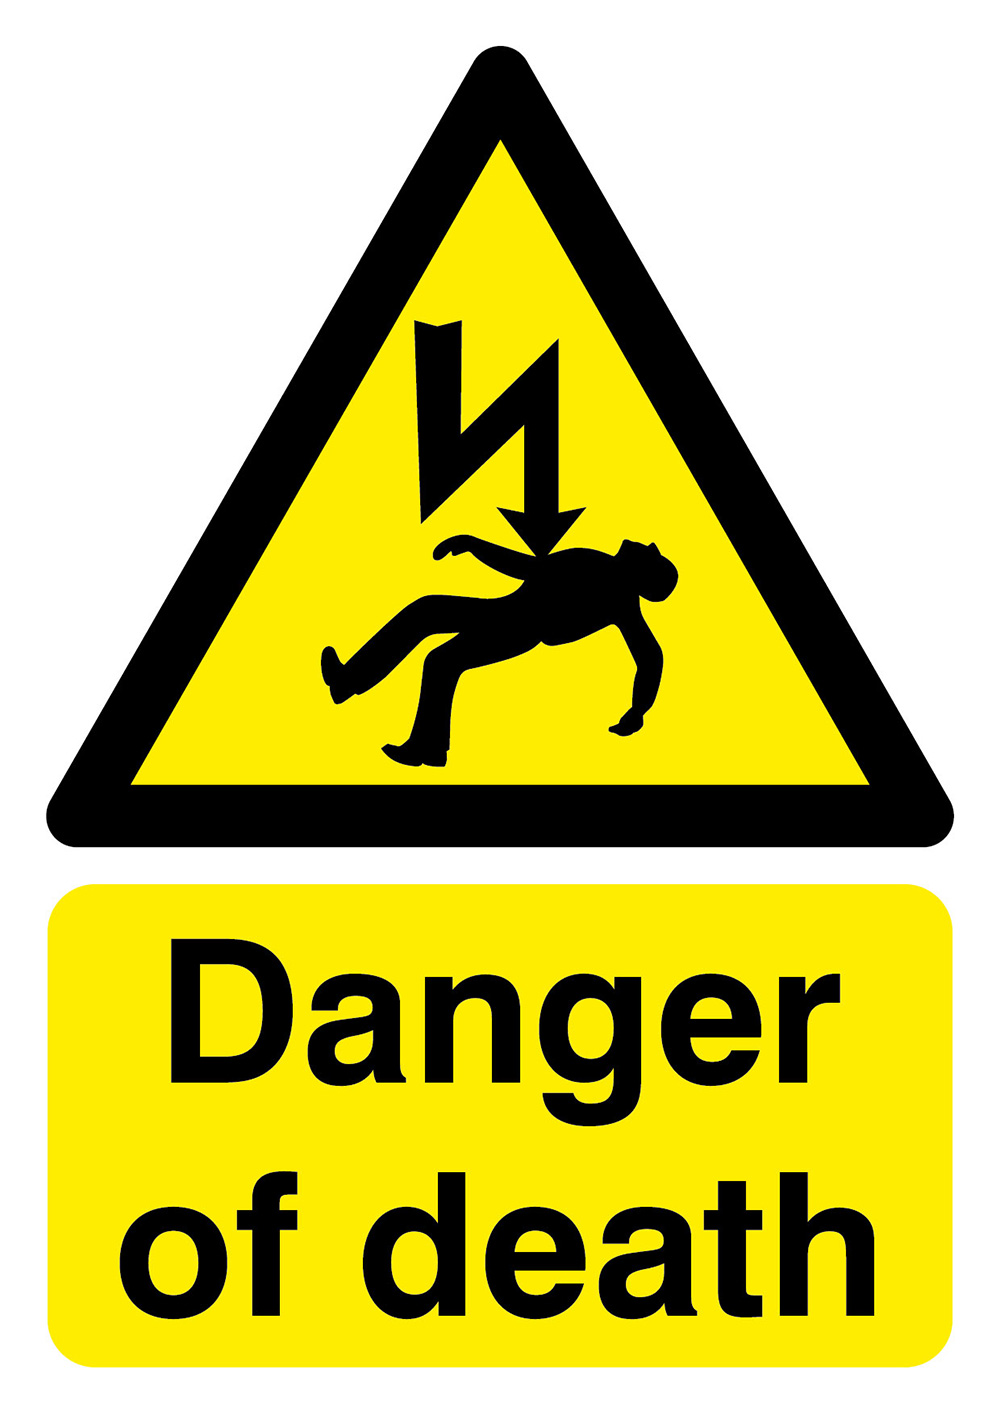 Danger Of Death           210x148mm Self Adhesive Vinyl Safety Sign  